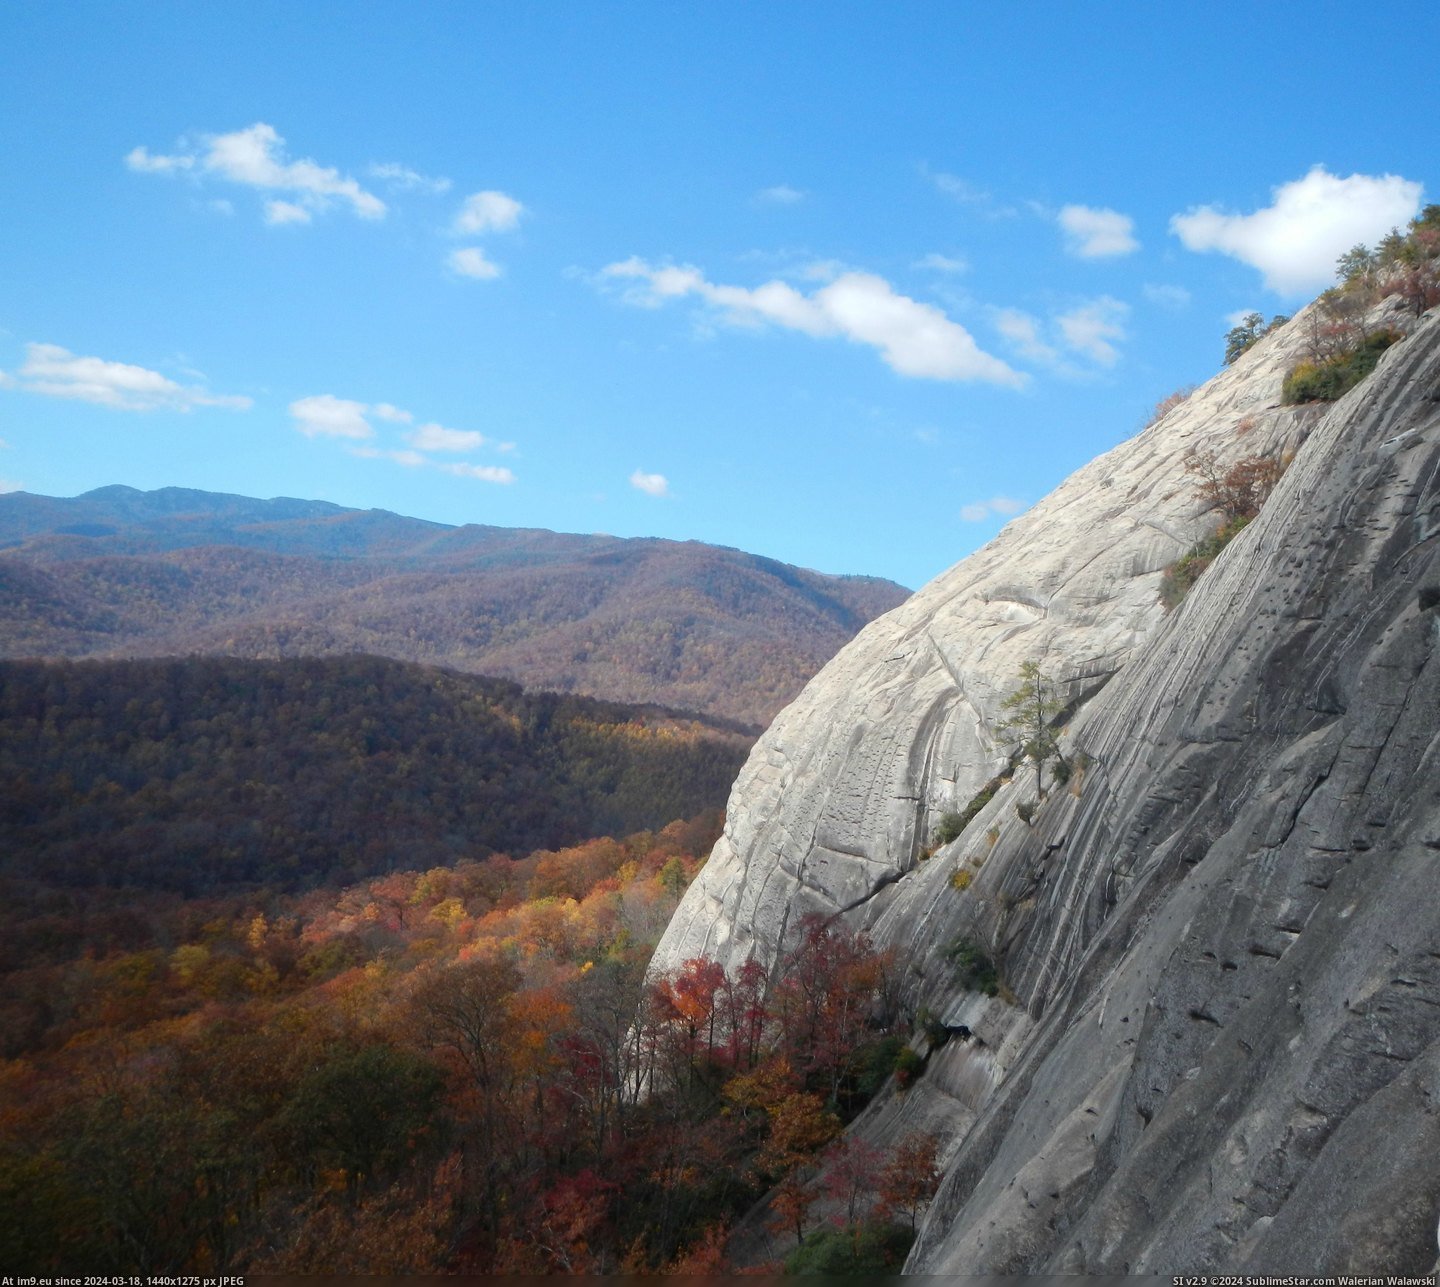 #National #Forest #Route #Climbing #Pisgah #Rock #Glass [Earthporn] From a climbing route on Looking Glass Rock: Pisgah National Forest, NC [OC] [2910x2588] Pic. (Obraz z album My r/EARTHPORN favs))